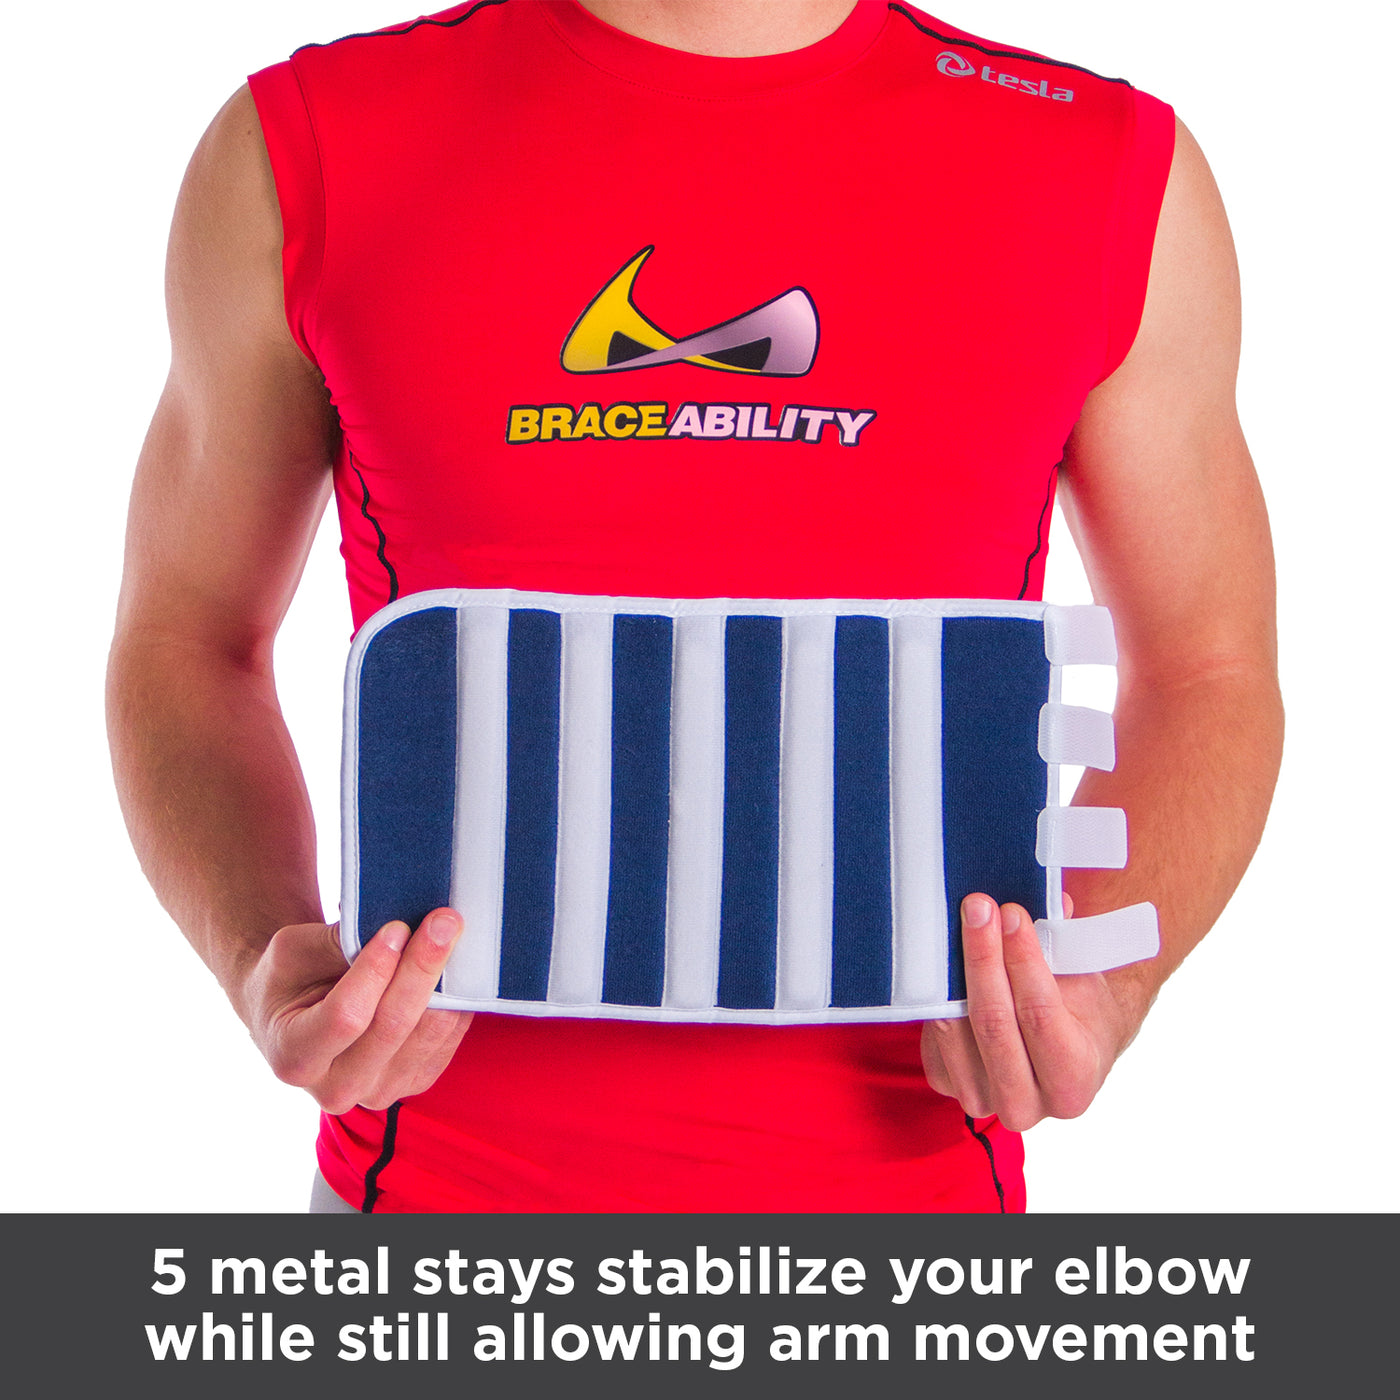 5 metal stays stabilize your elbow while still allowing arm movement